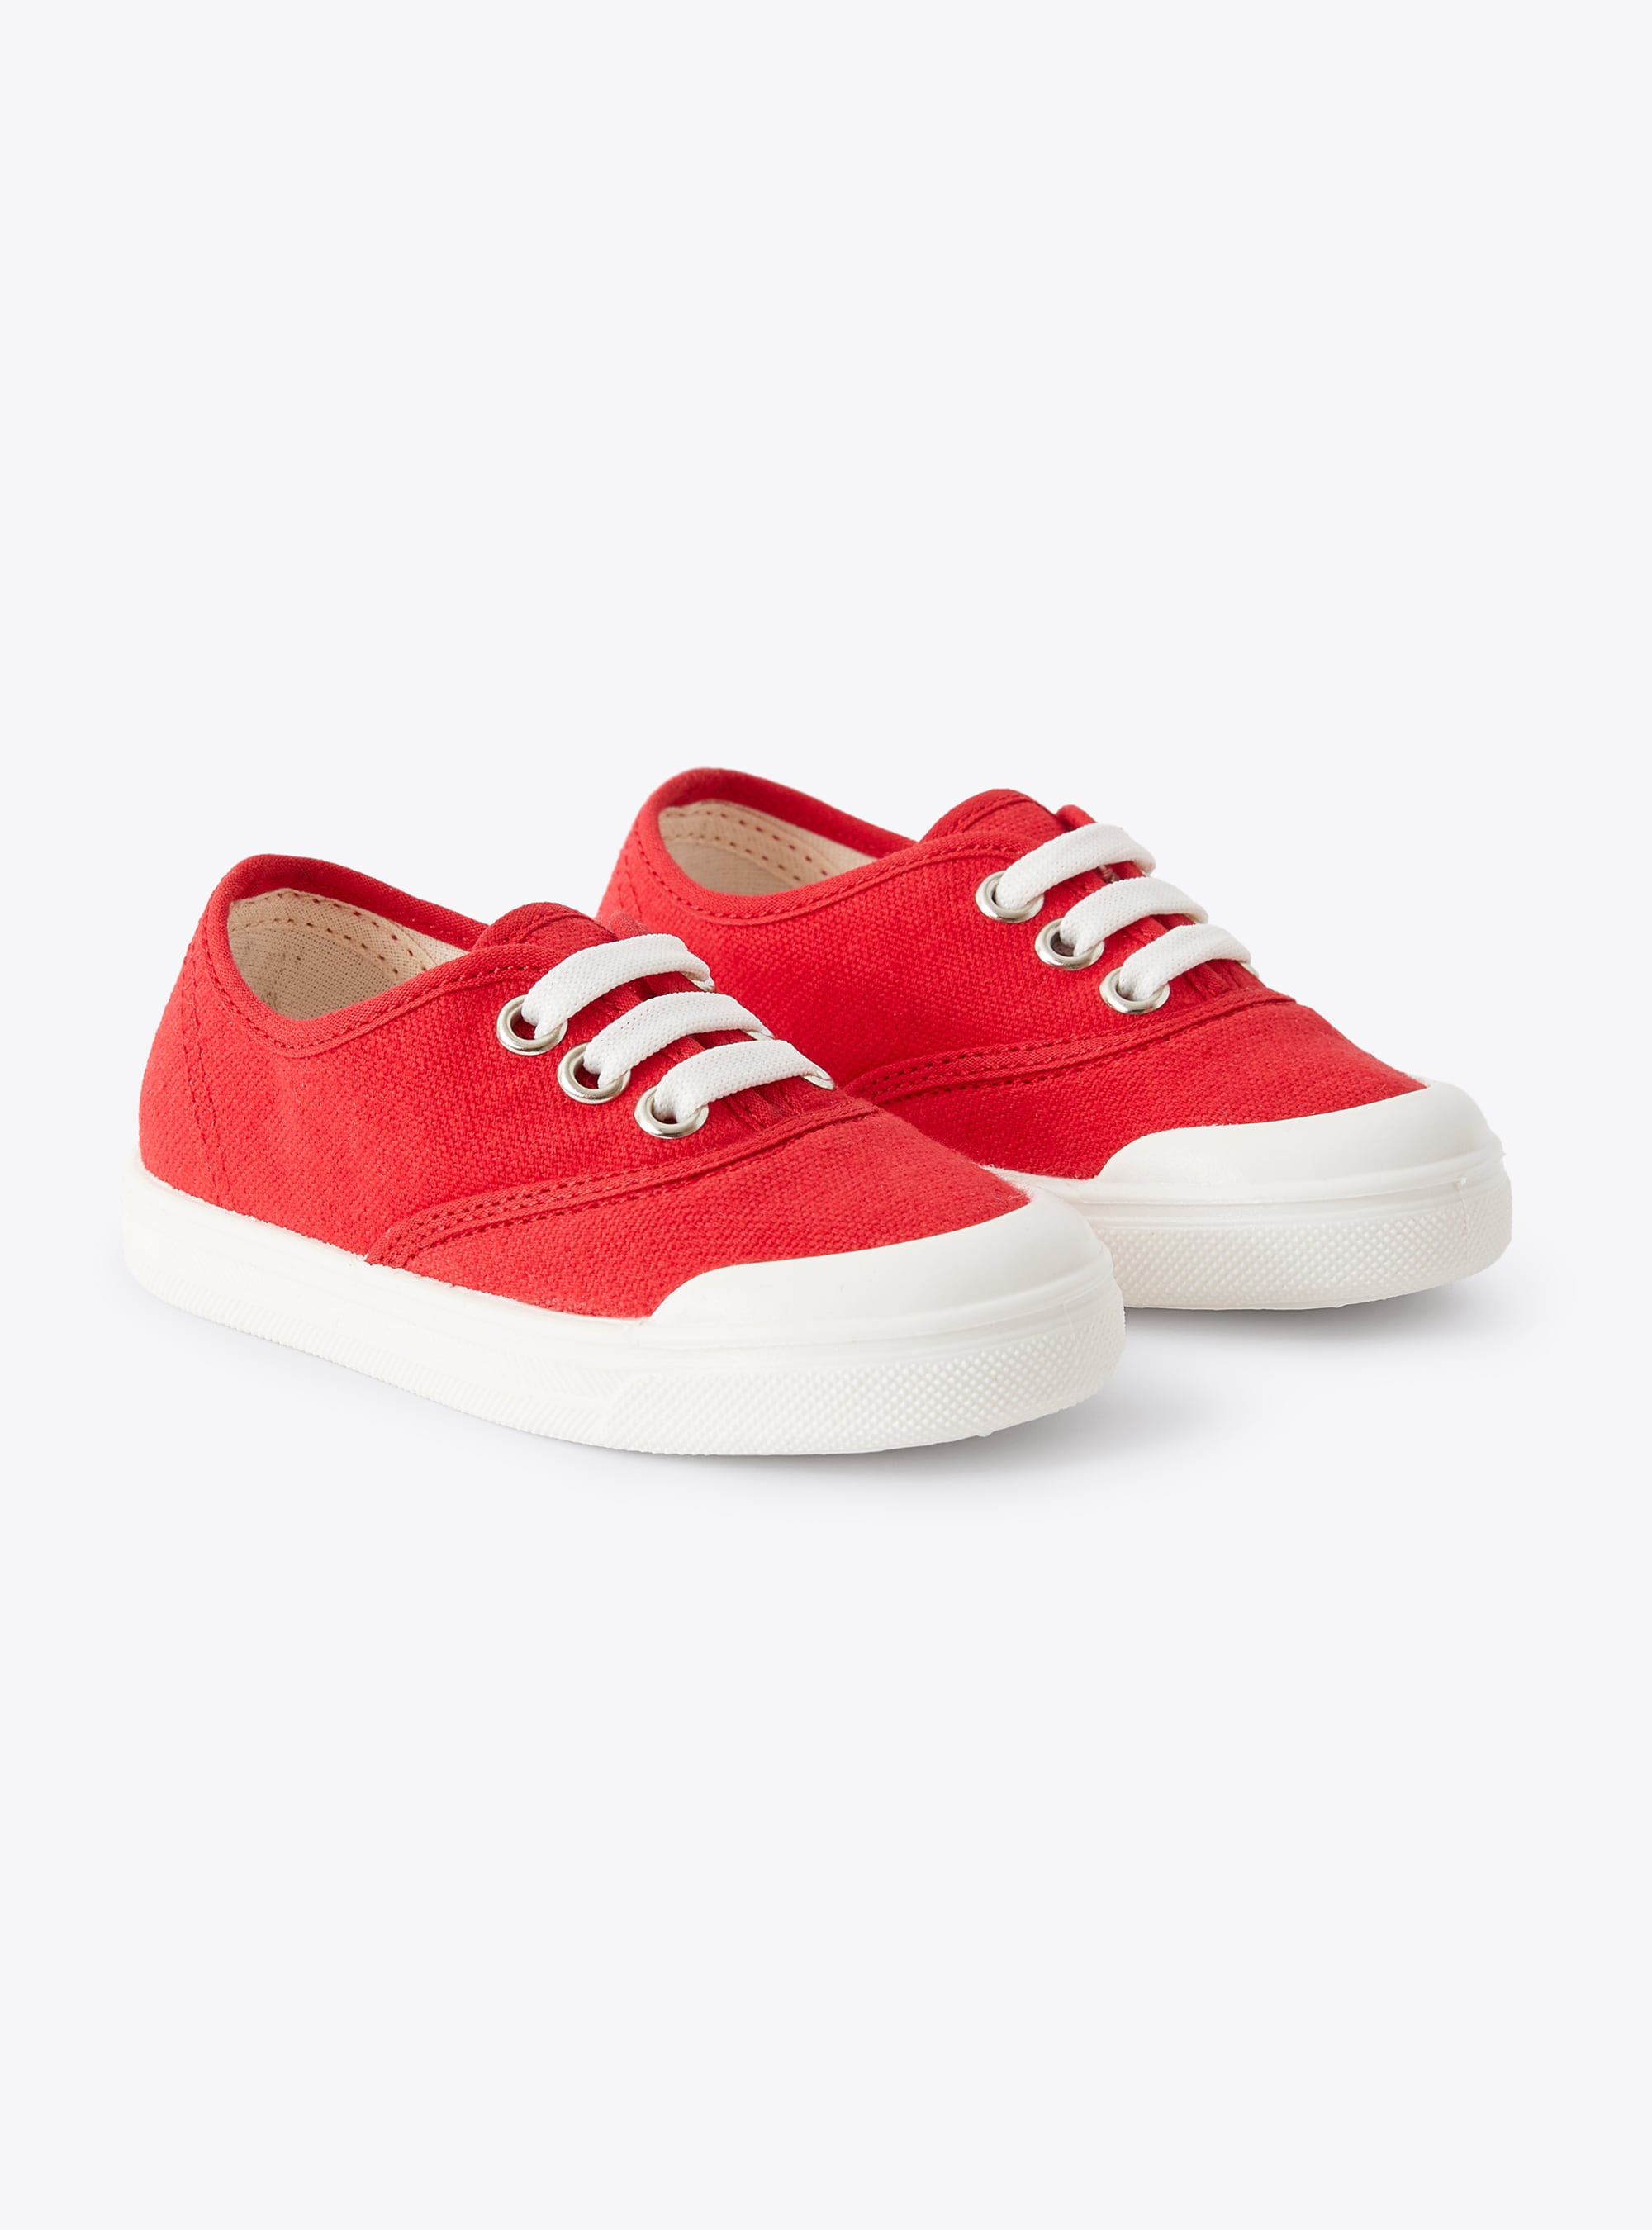 Sneaker in red canvas with laces - Red | Il Gufo